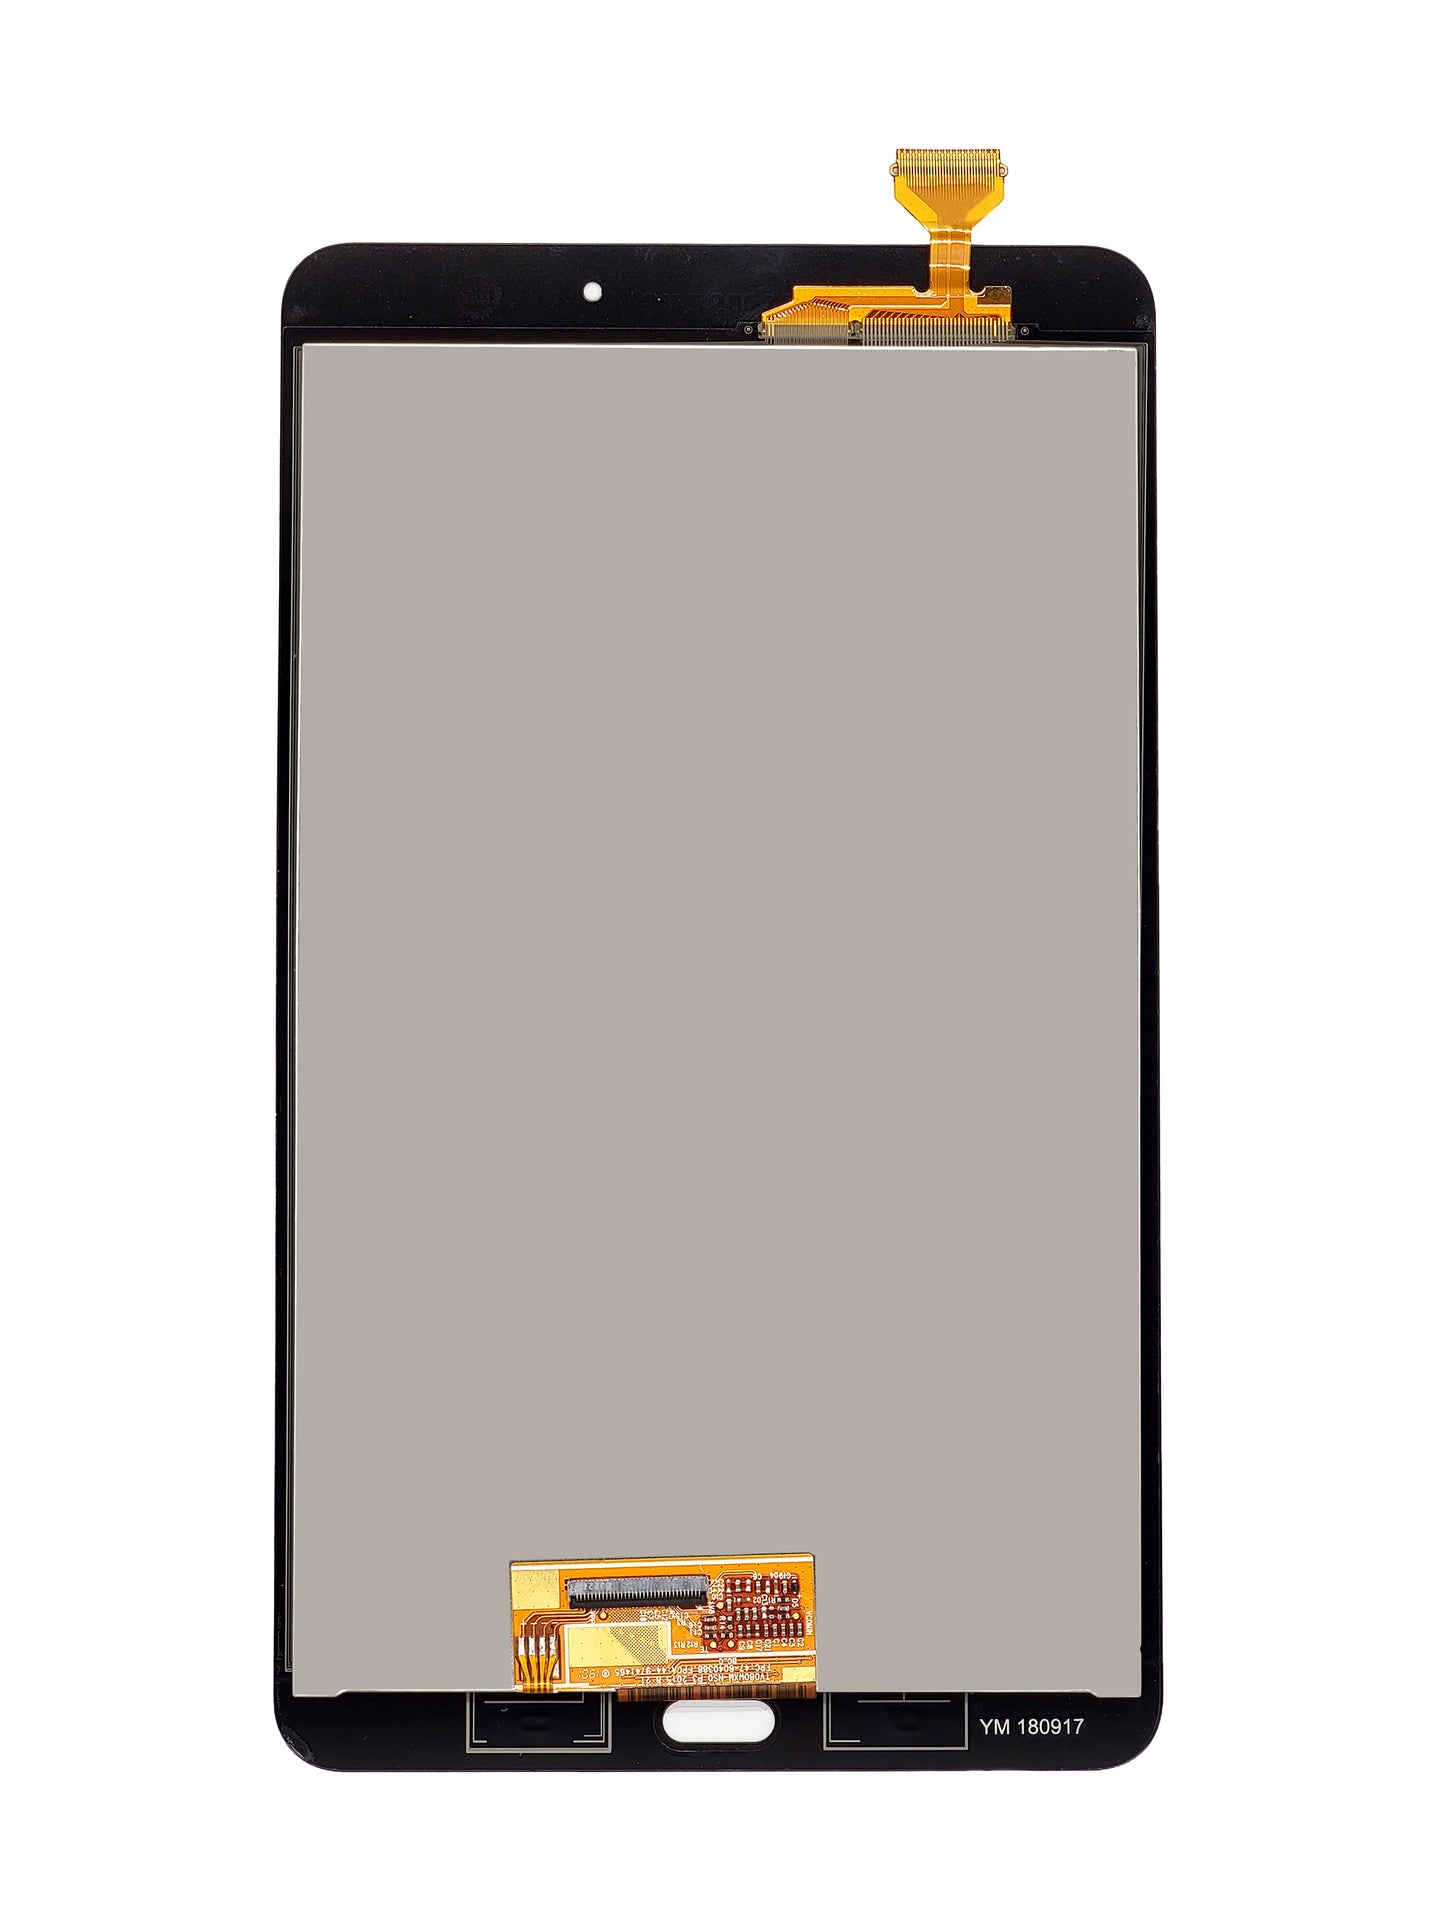 SGT Tab A 8" 2017 (T380) LCD Assembly With Digitizer (Black)